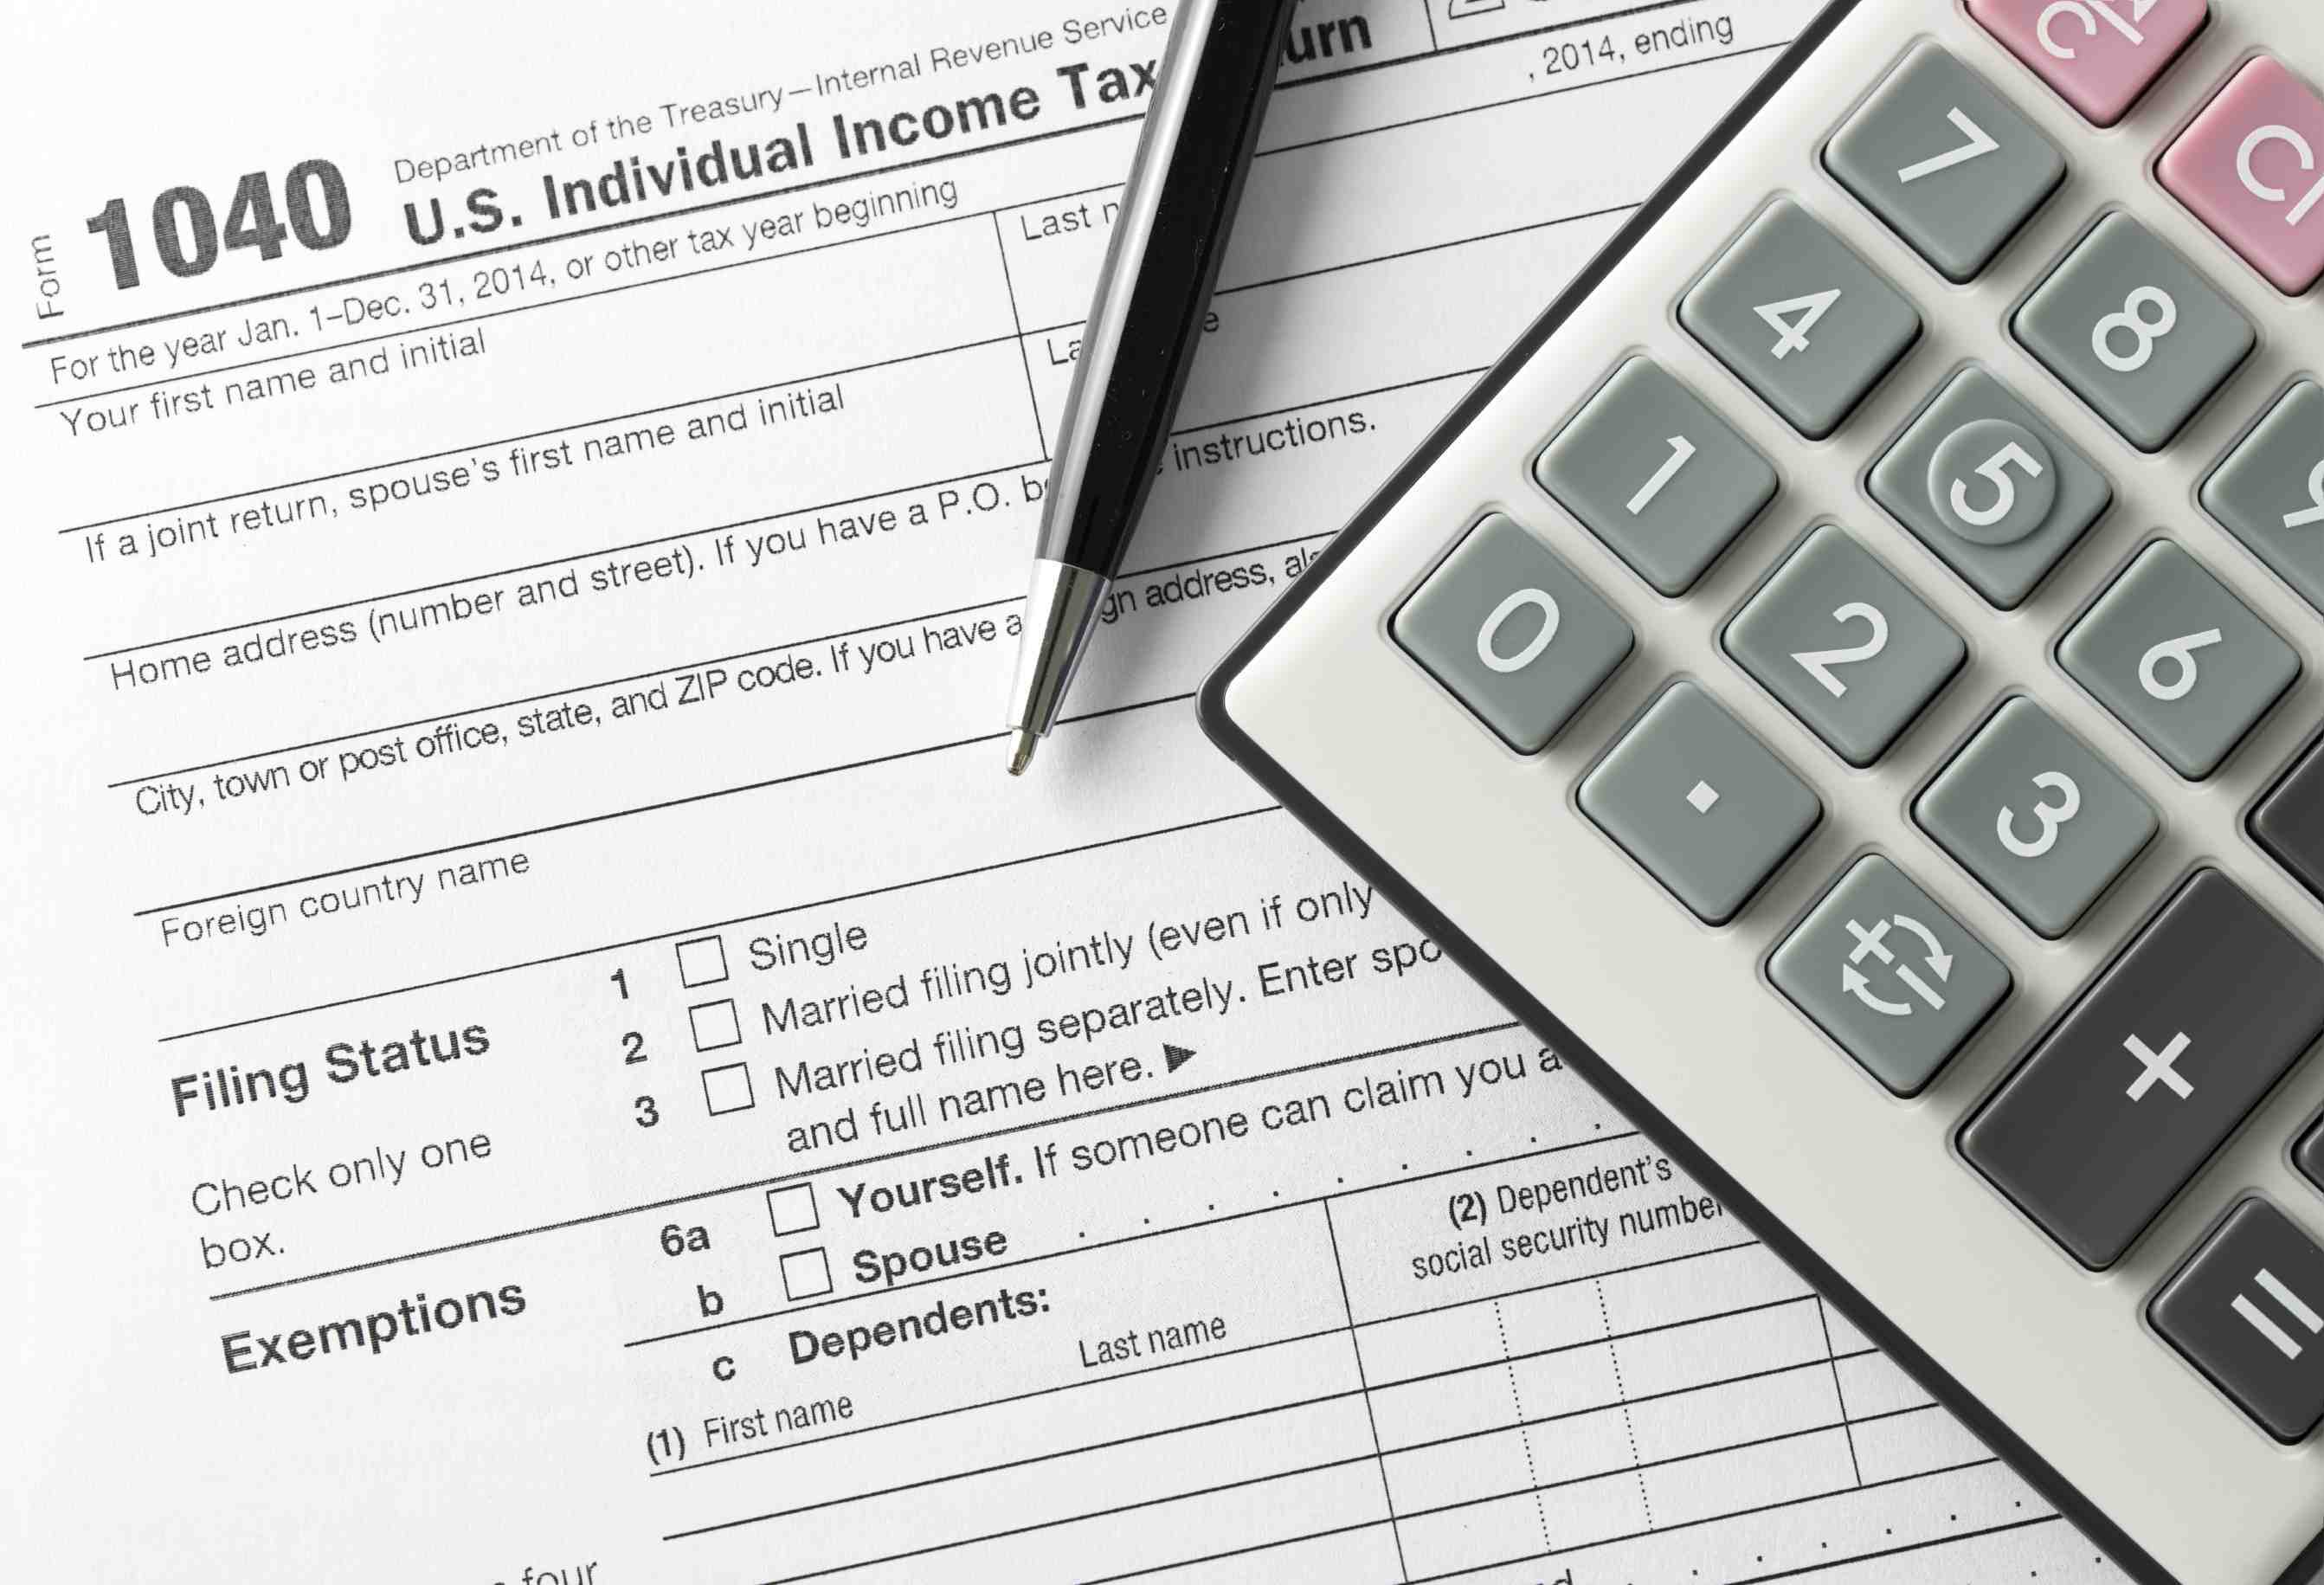 Do You Need a Copy of a Past Tax Return? | US Tax Center